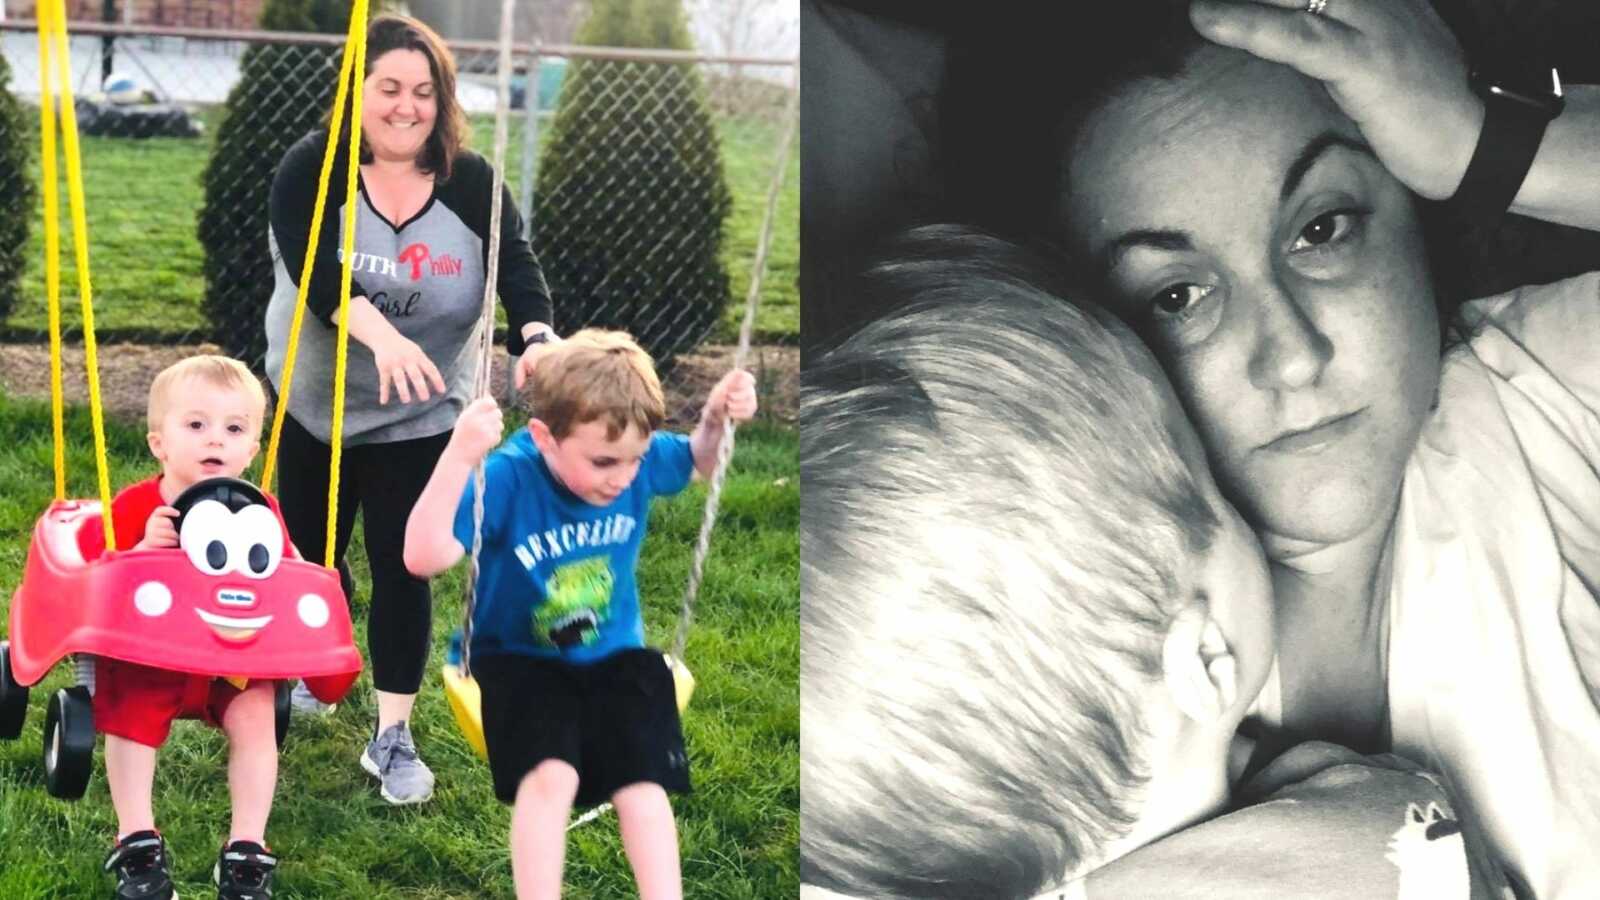 A mom pushes her kids on the swings and a mom burned out